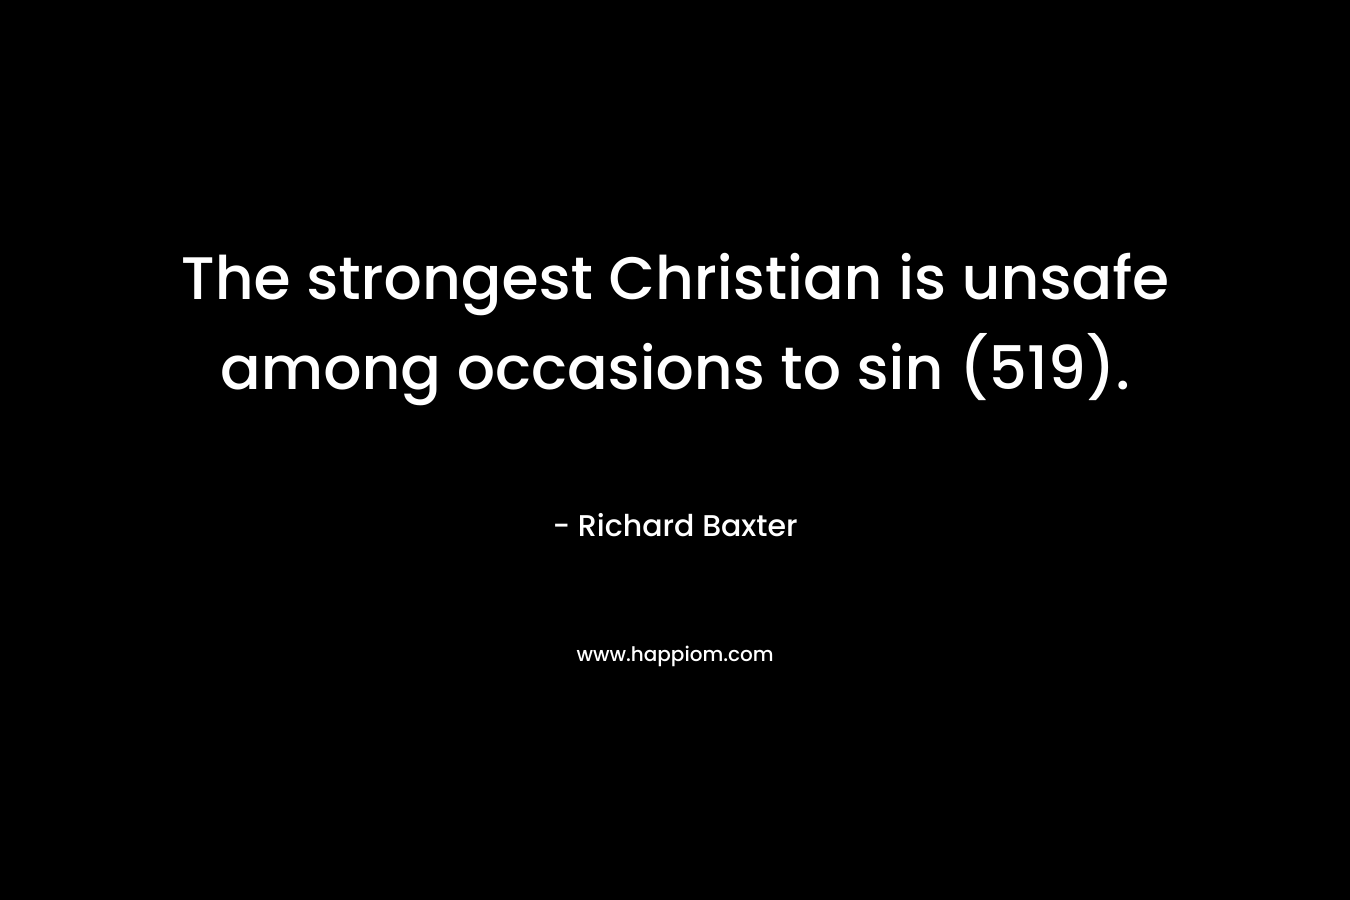 The strongest Christian is unsafe among occasions to sin (519).